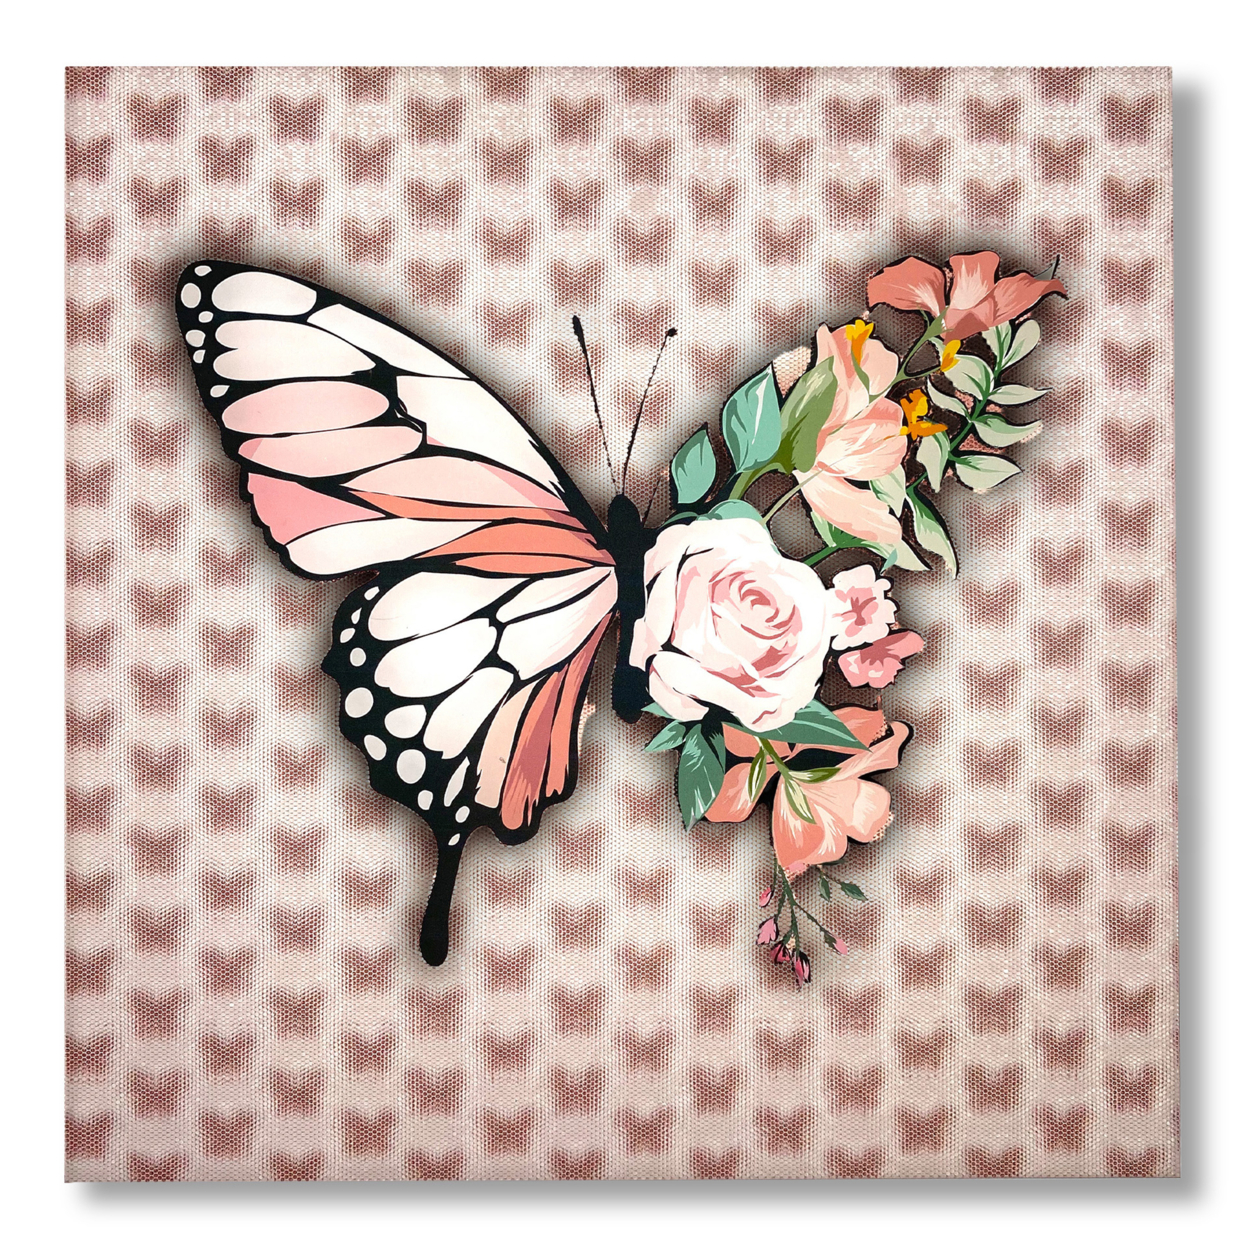 5D Multi-Dimensional Flower Butterfly Wall Art Print On Strong Polycarbonate Panel - Interactive, Lenticular Artwork By Matashi (16x16 Inch)